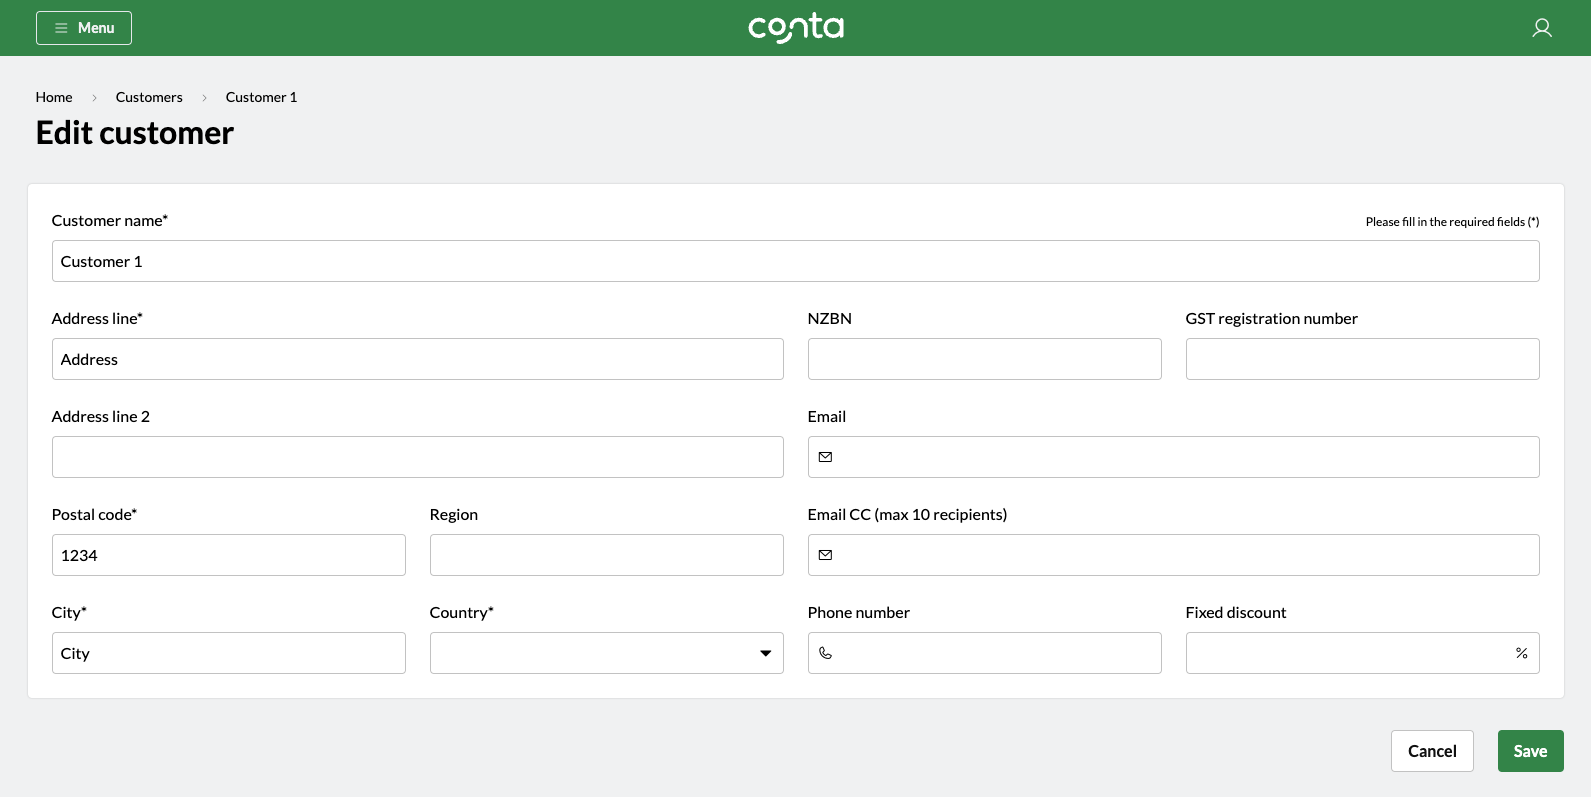 The edit customer-page in Conta, where you can see and edit customer information 